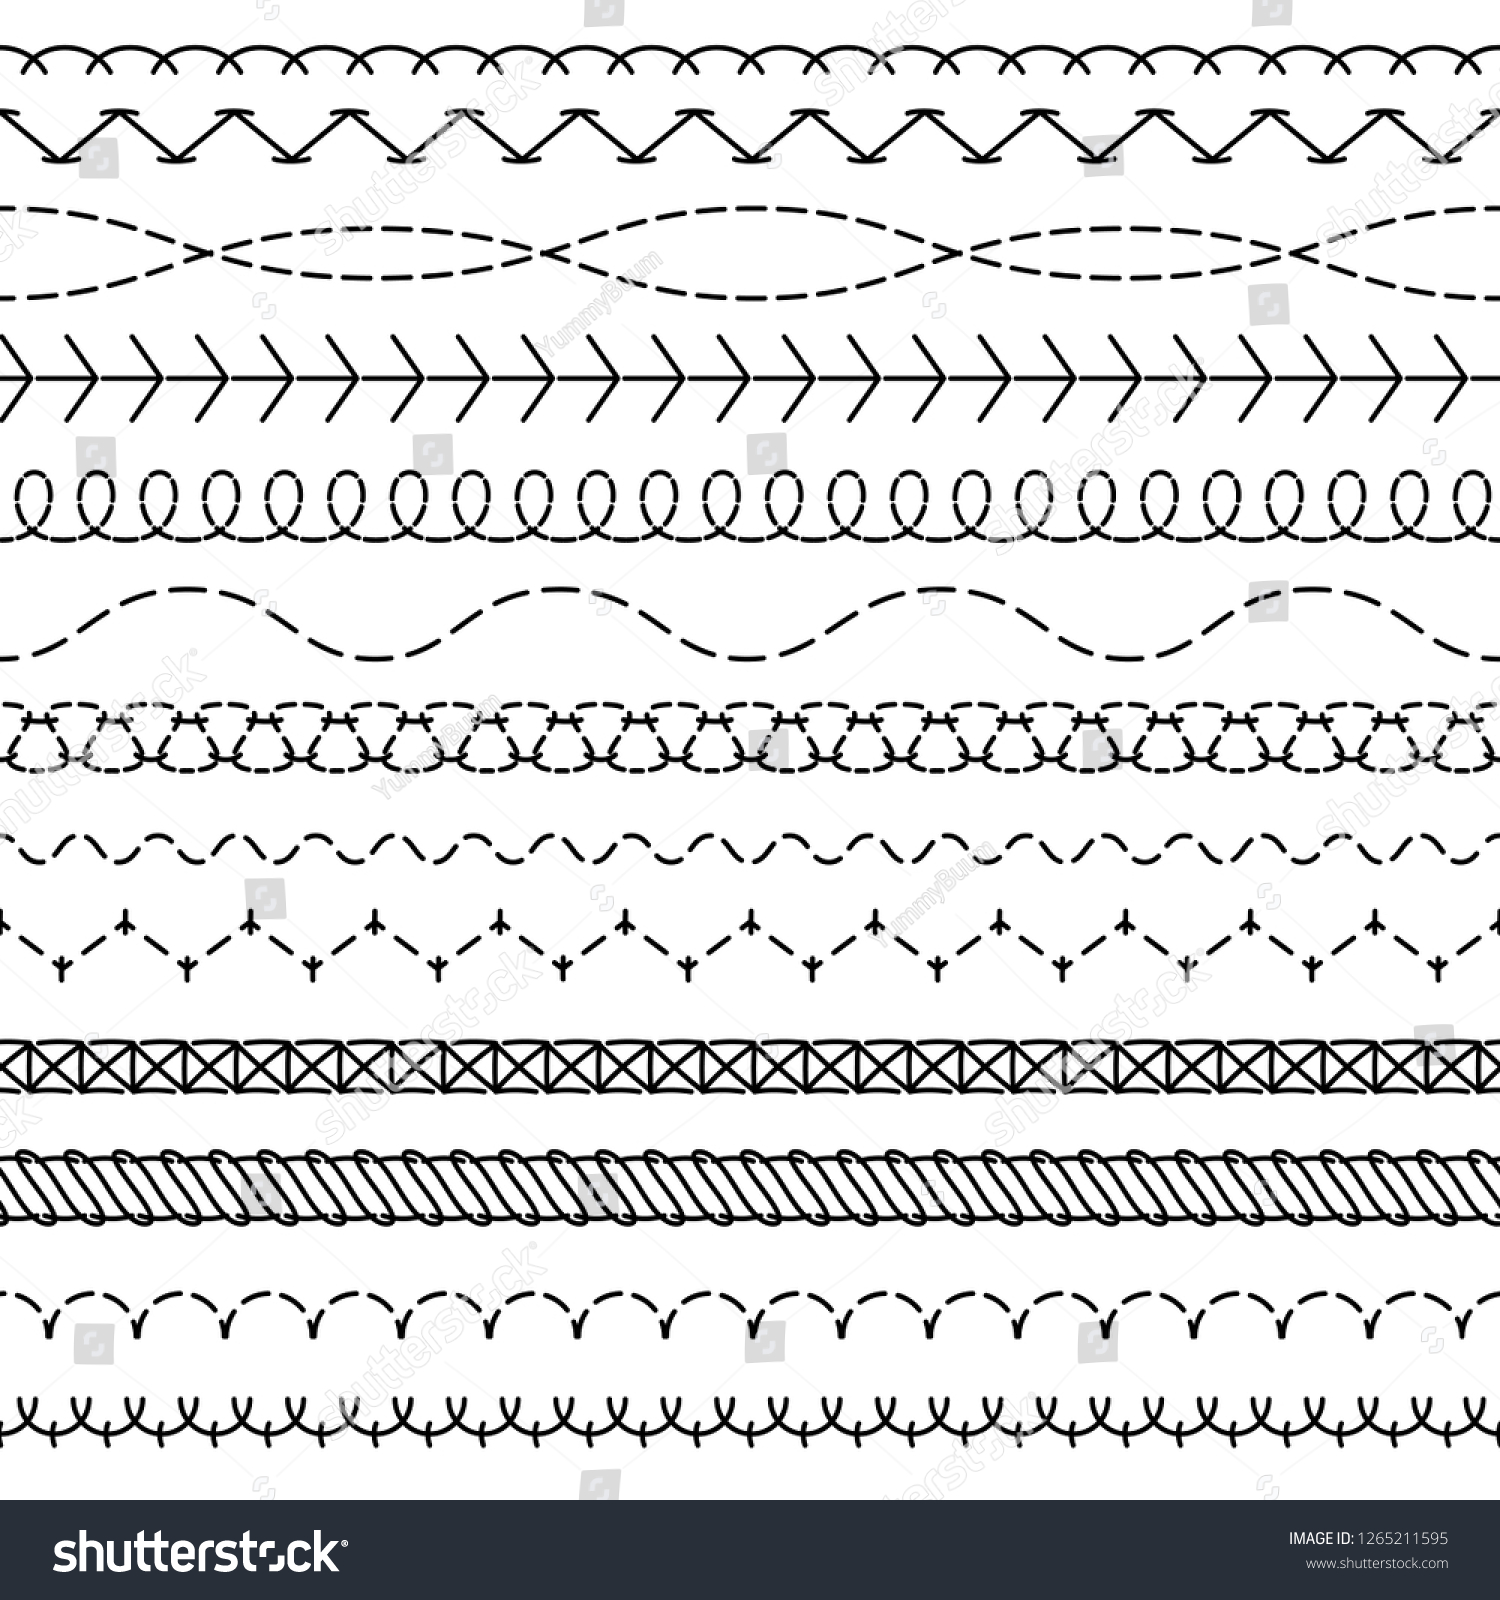 Stitch Lines Stitched Seamless Pattern Threading Stock Vector (Royalty ...